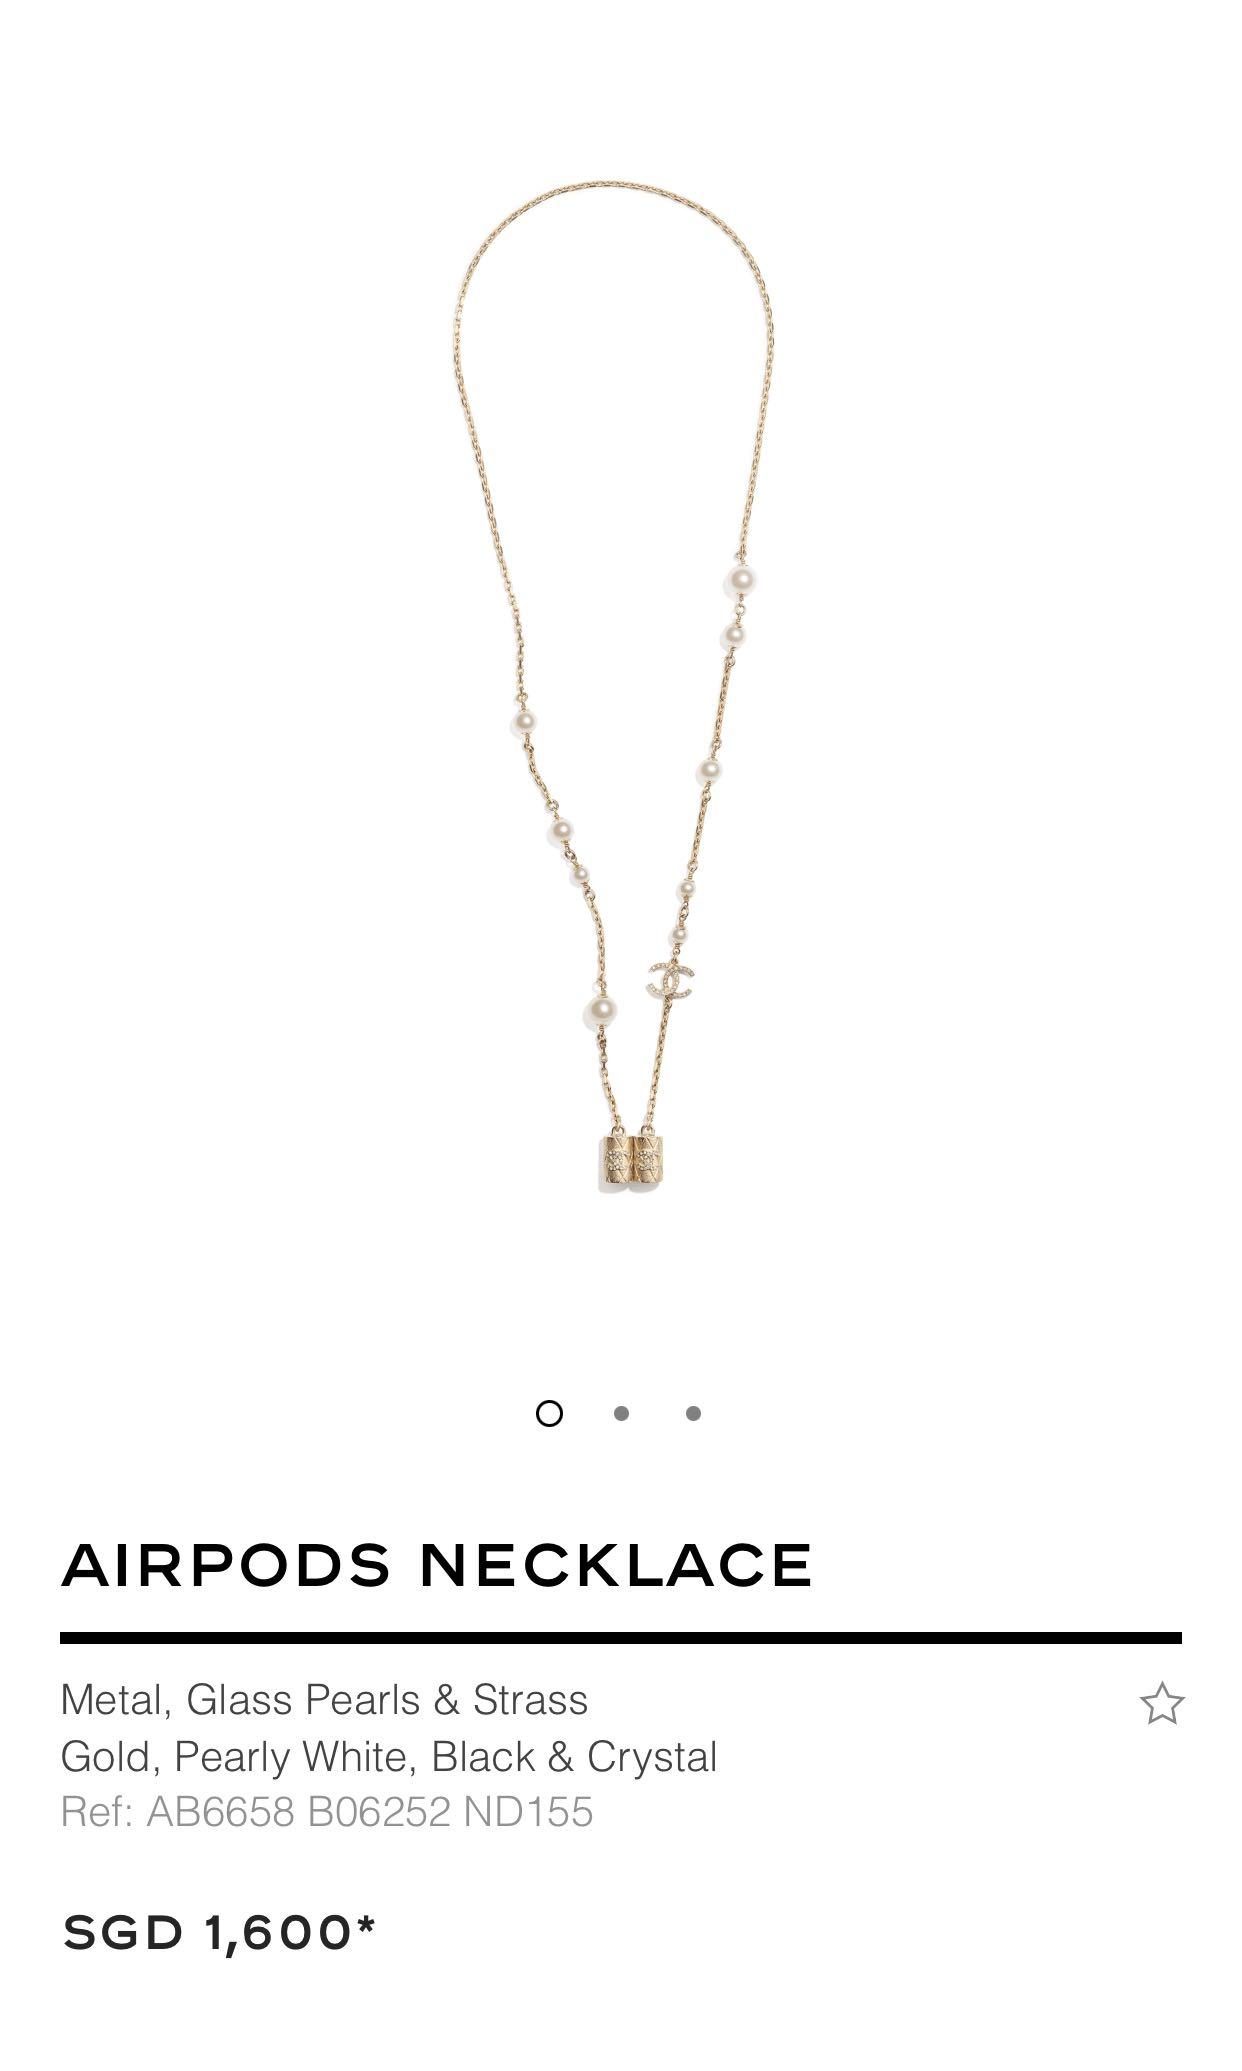 Chanel wants to upgrade your AirPod case with a 2060 pearl necklace   Metro News